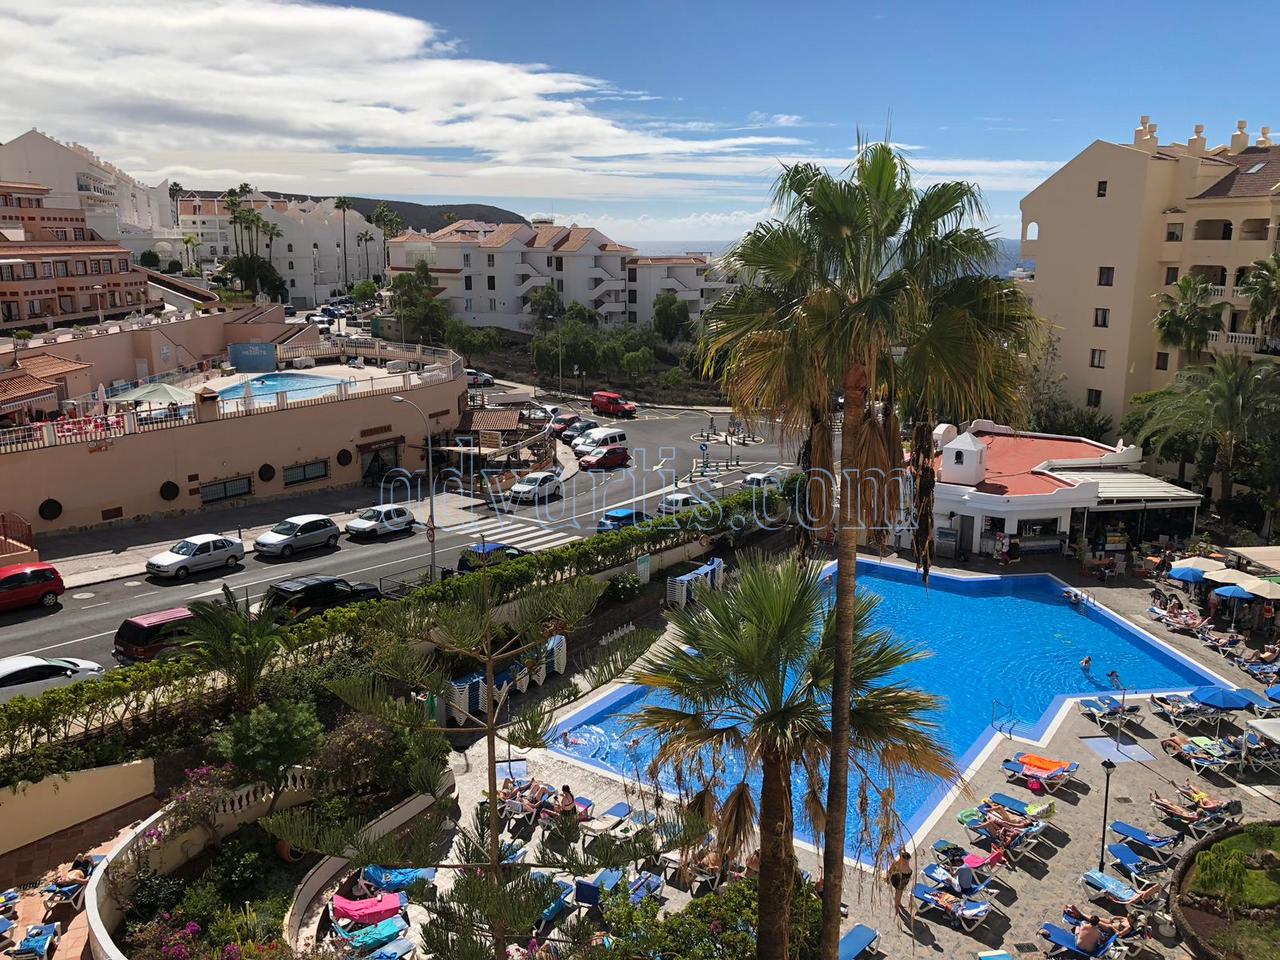 2 bedroom apartment for sale in Castle Harbour, Los Cristianos, Tenerife €237.000